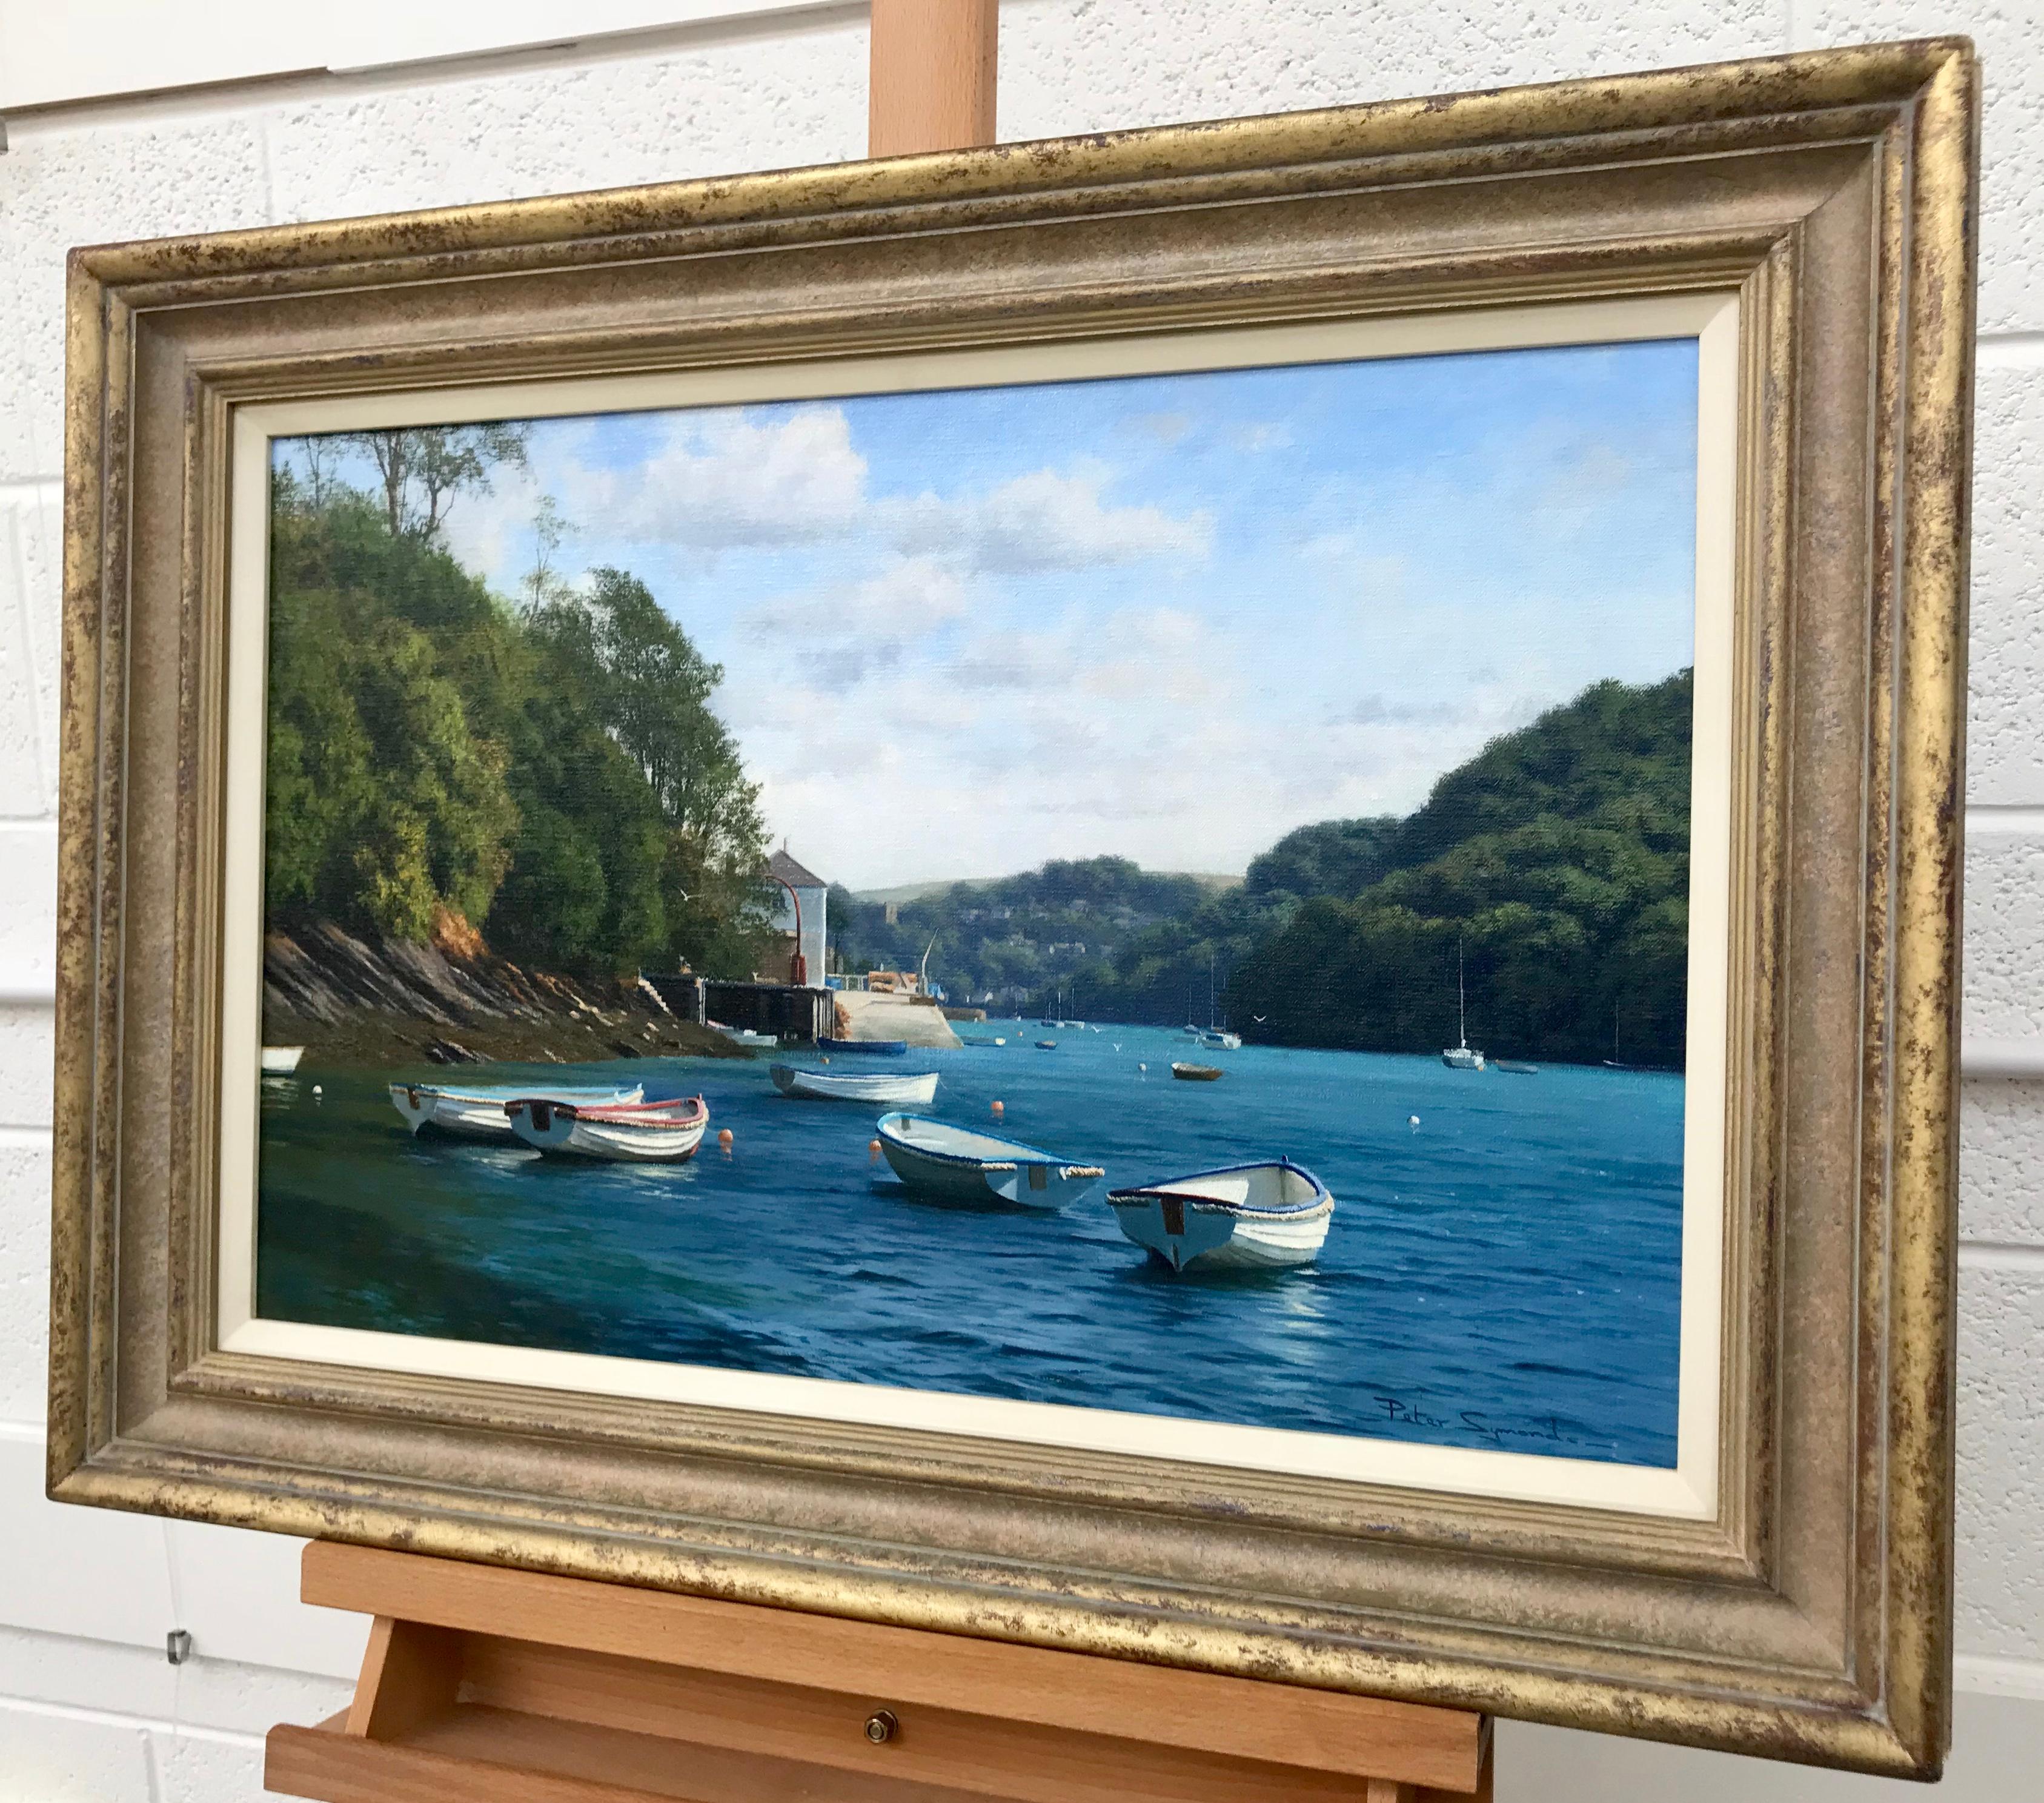 Oil Painting of Boats on River Yealm Devon England by British Landscape Artist For Sale 2